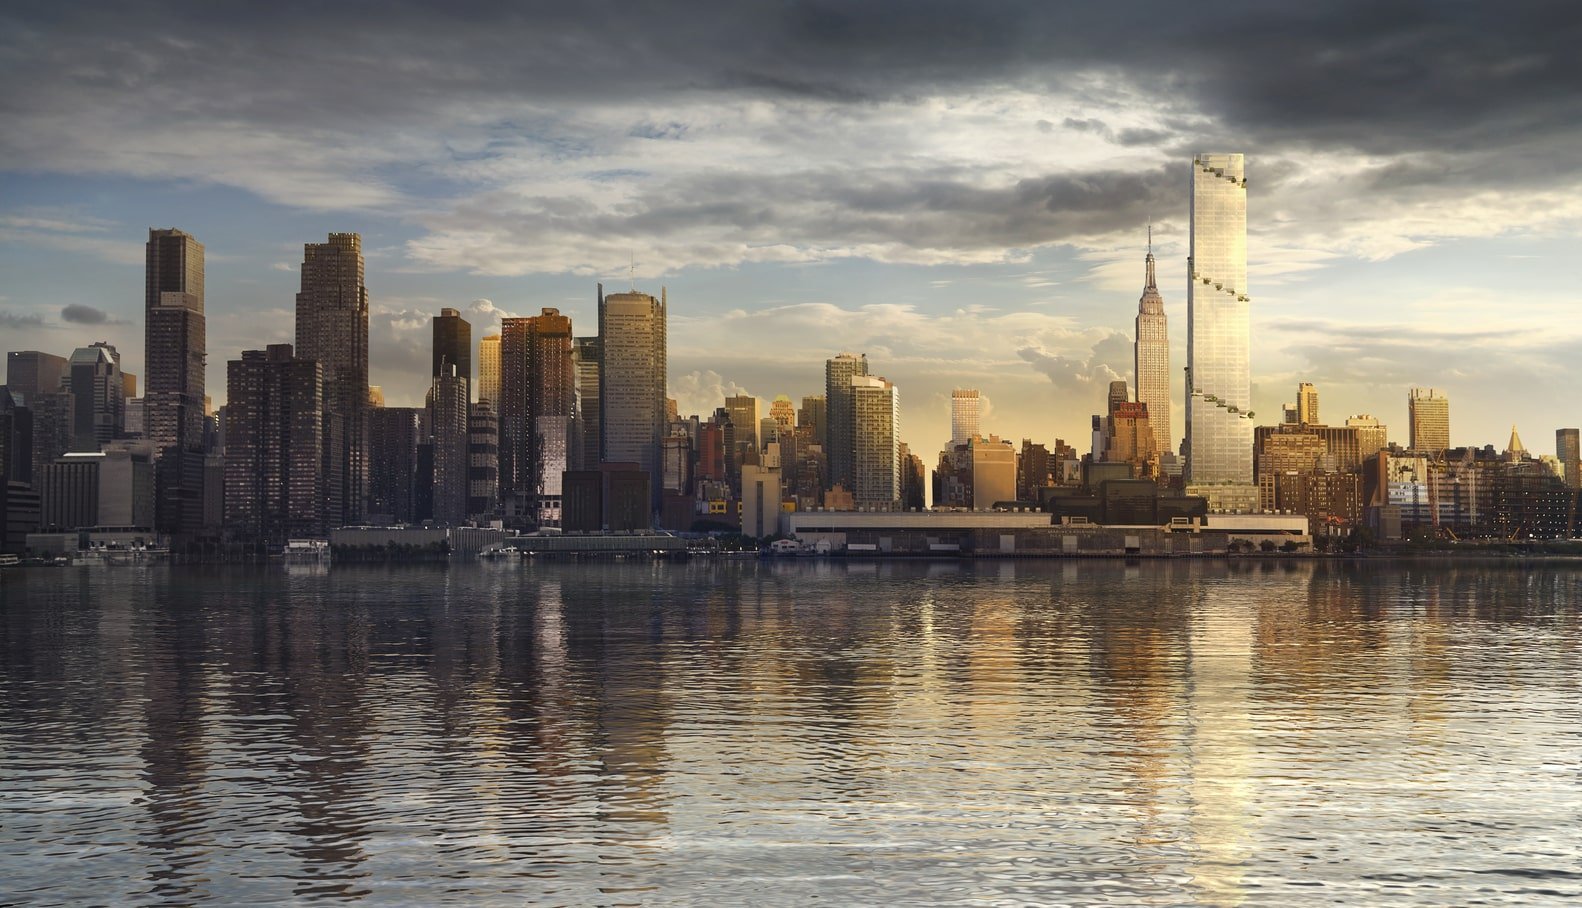 Mirrored skyscraper may soon appear in new York